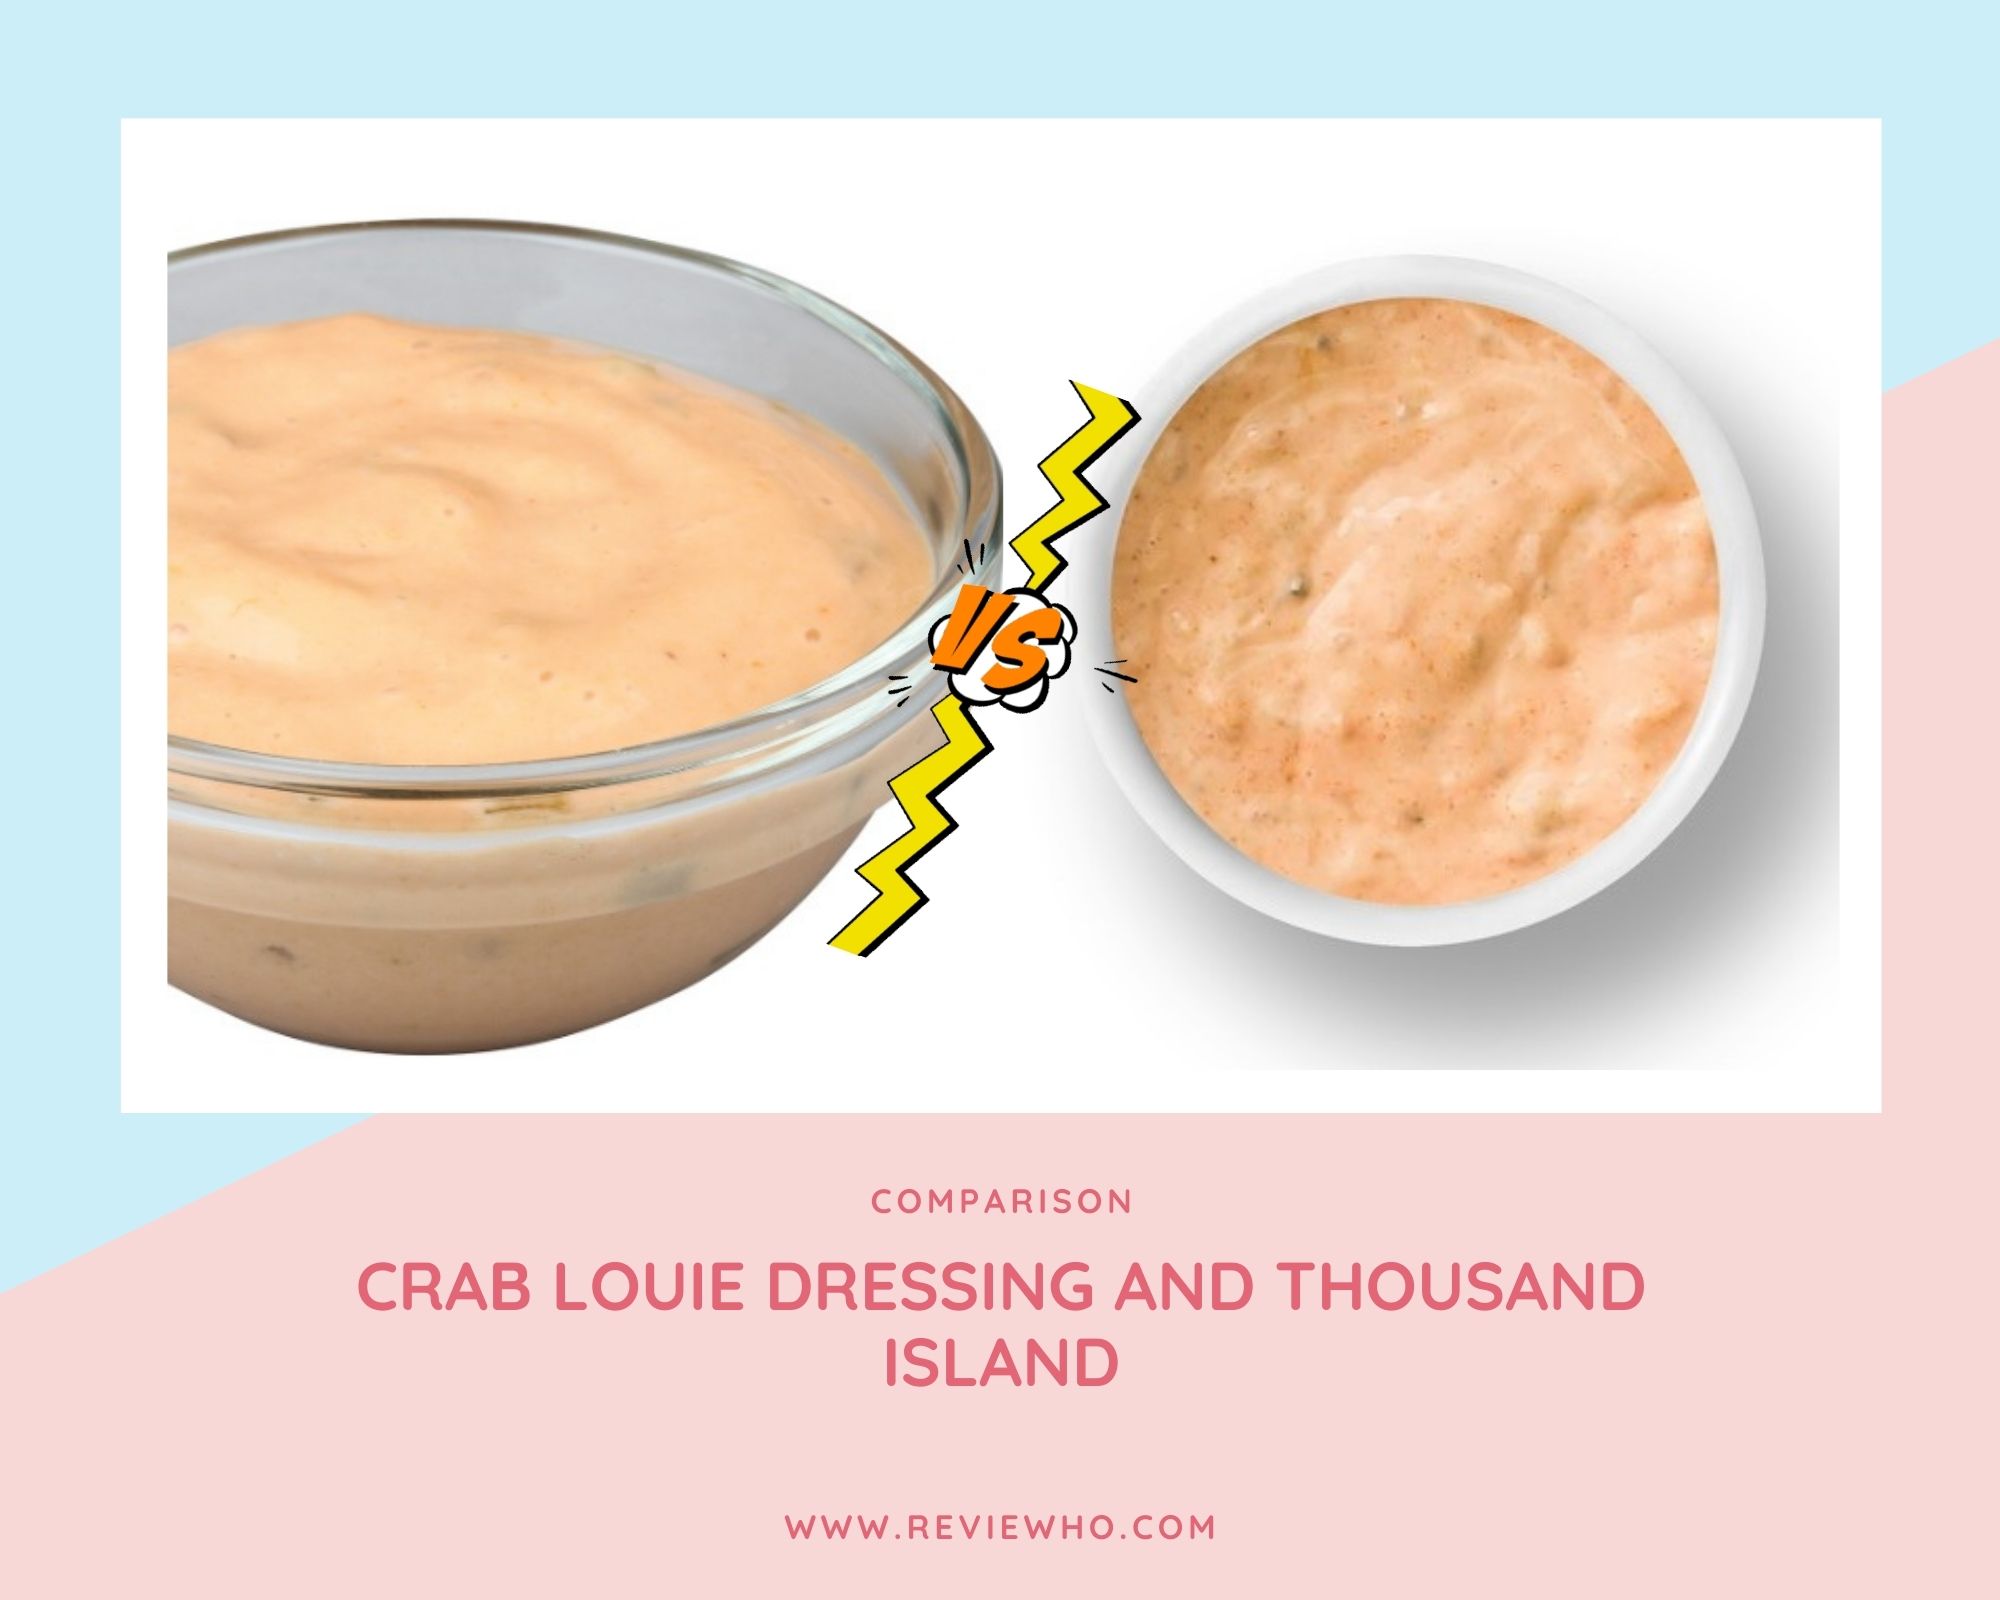 Crab Louie Dressing and Thousand Island (1)